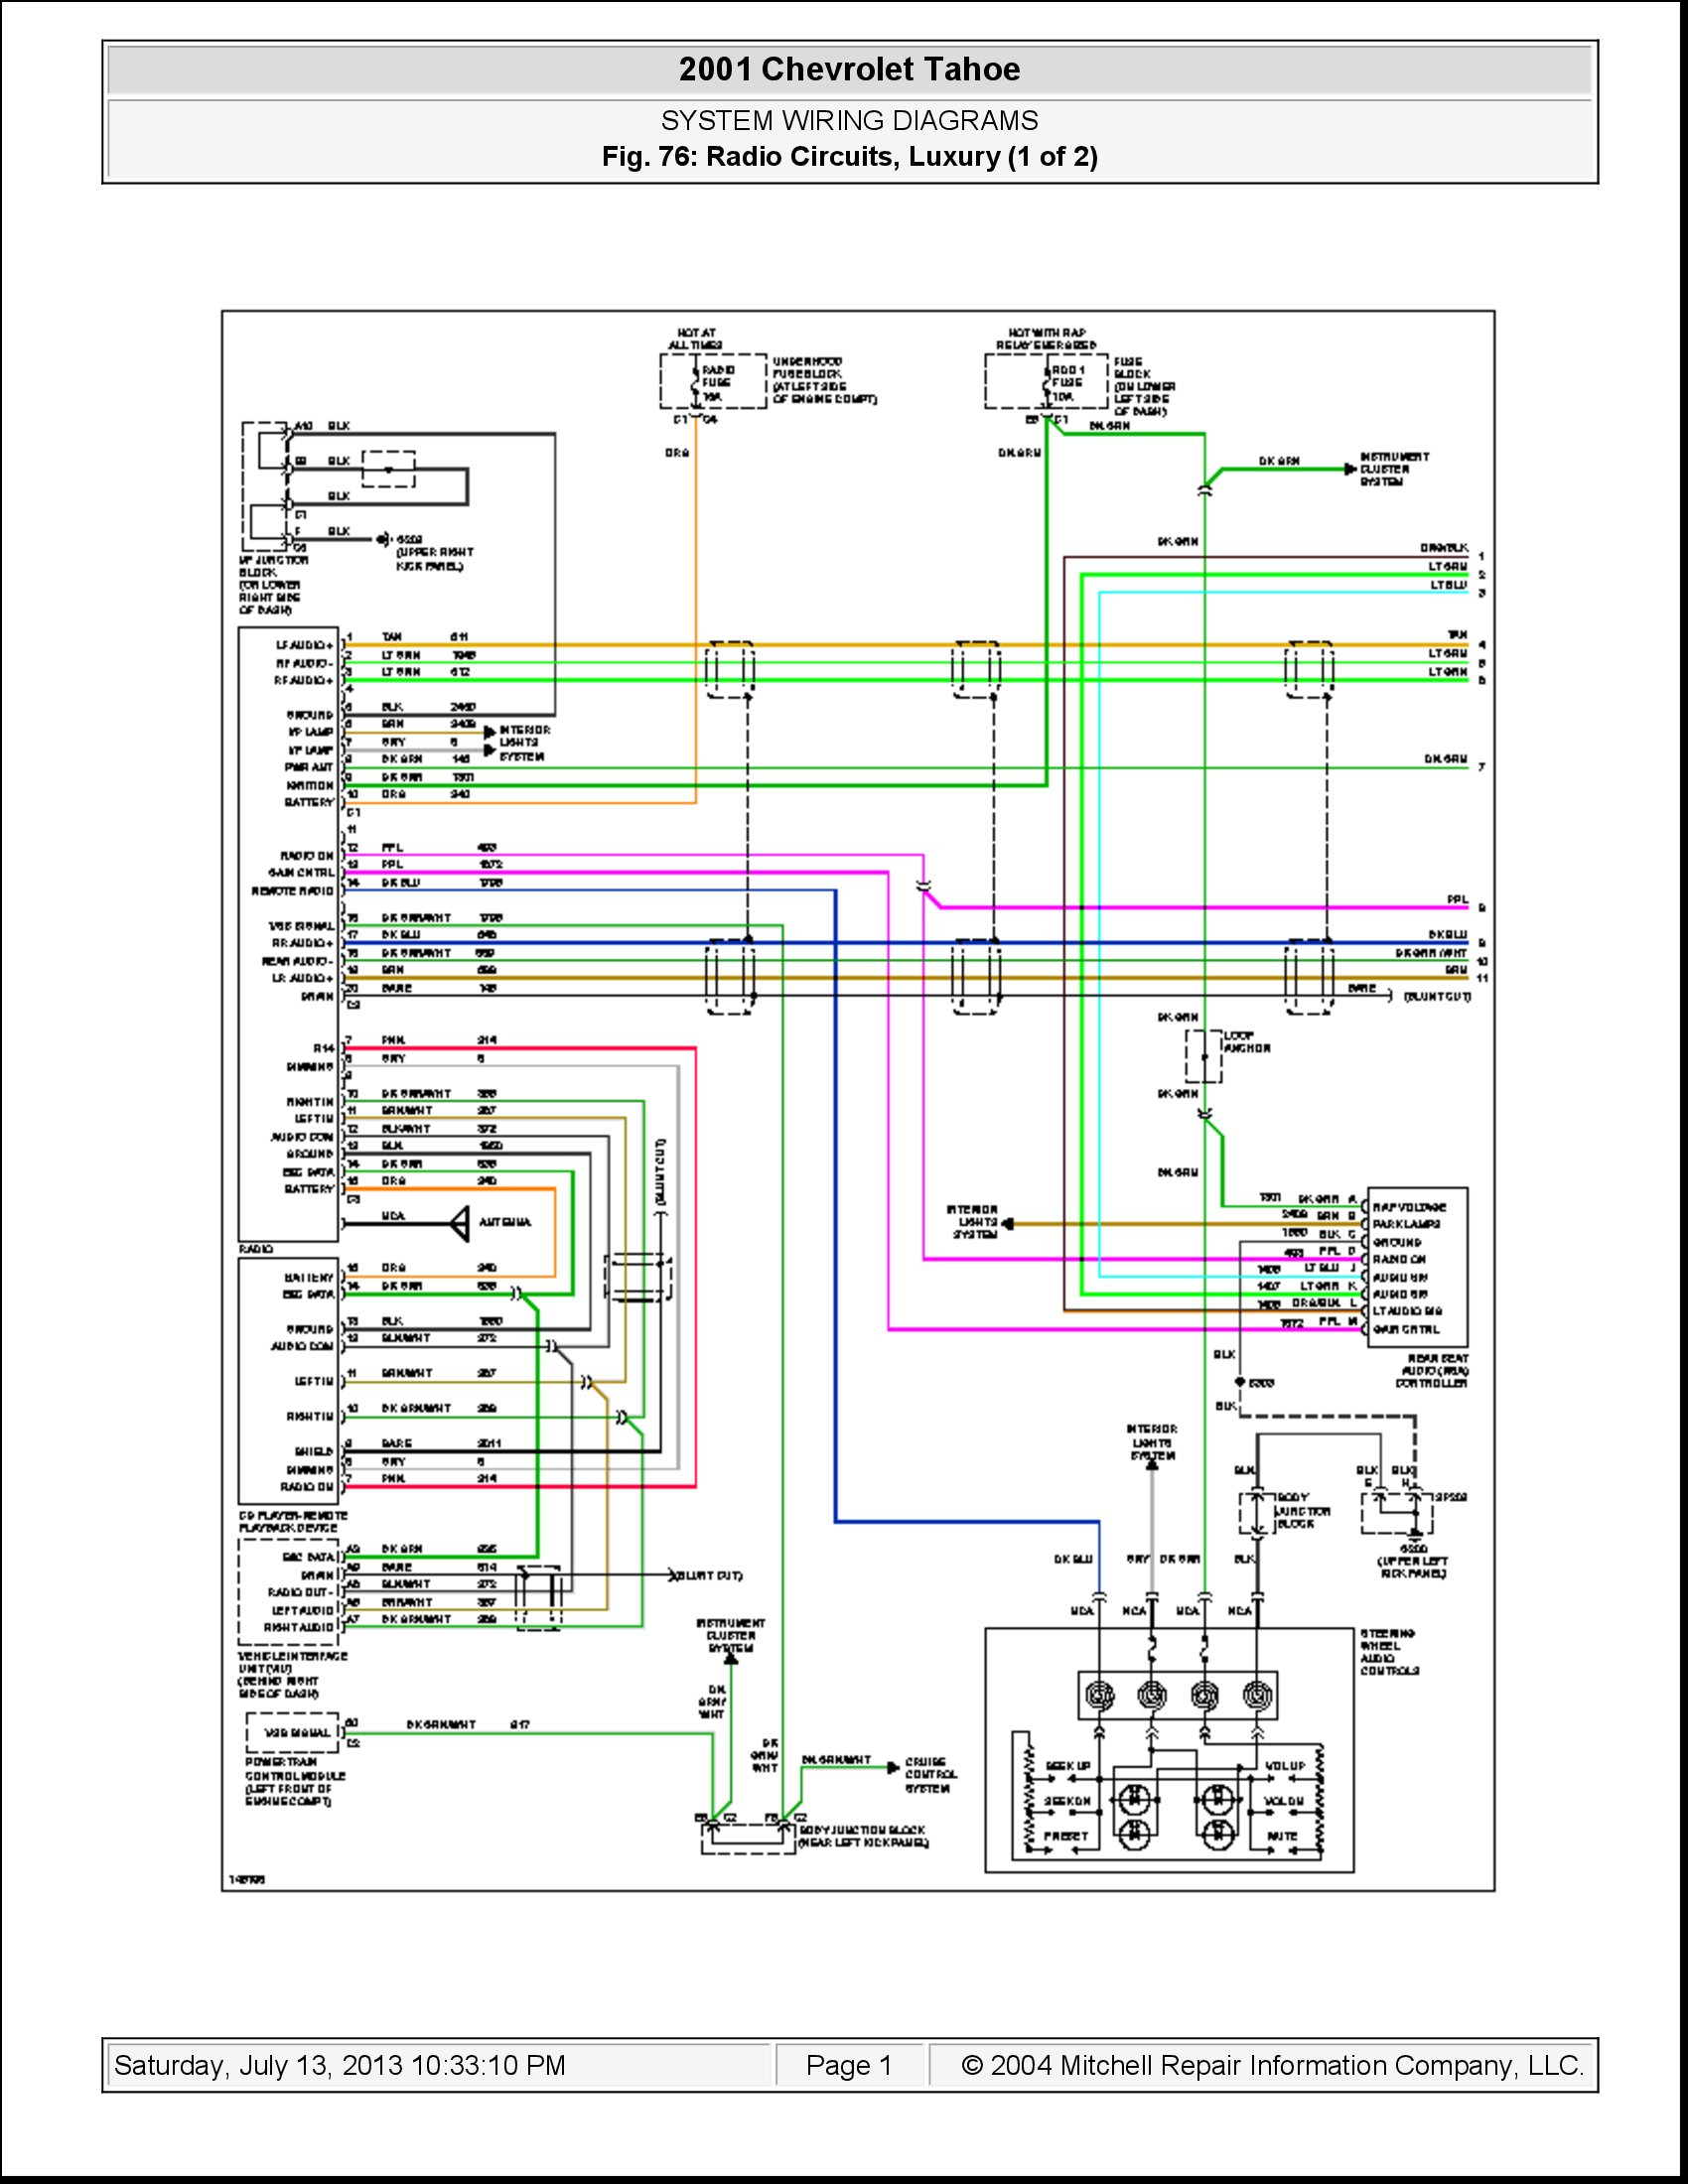 I Need A Diagram Of The Stereo Wiring In A 2001 Chevy Tahoe